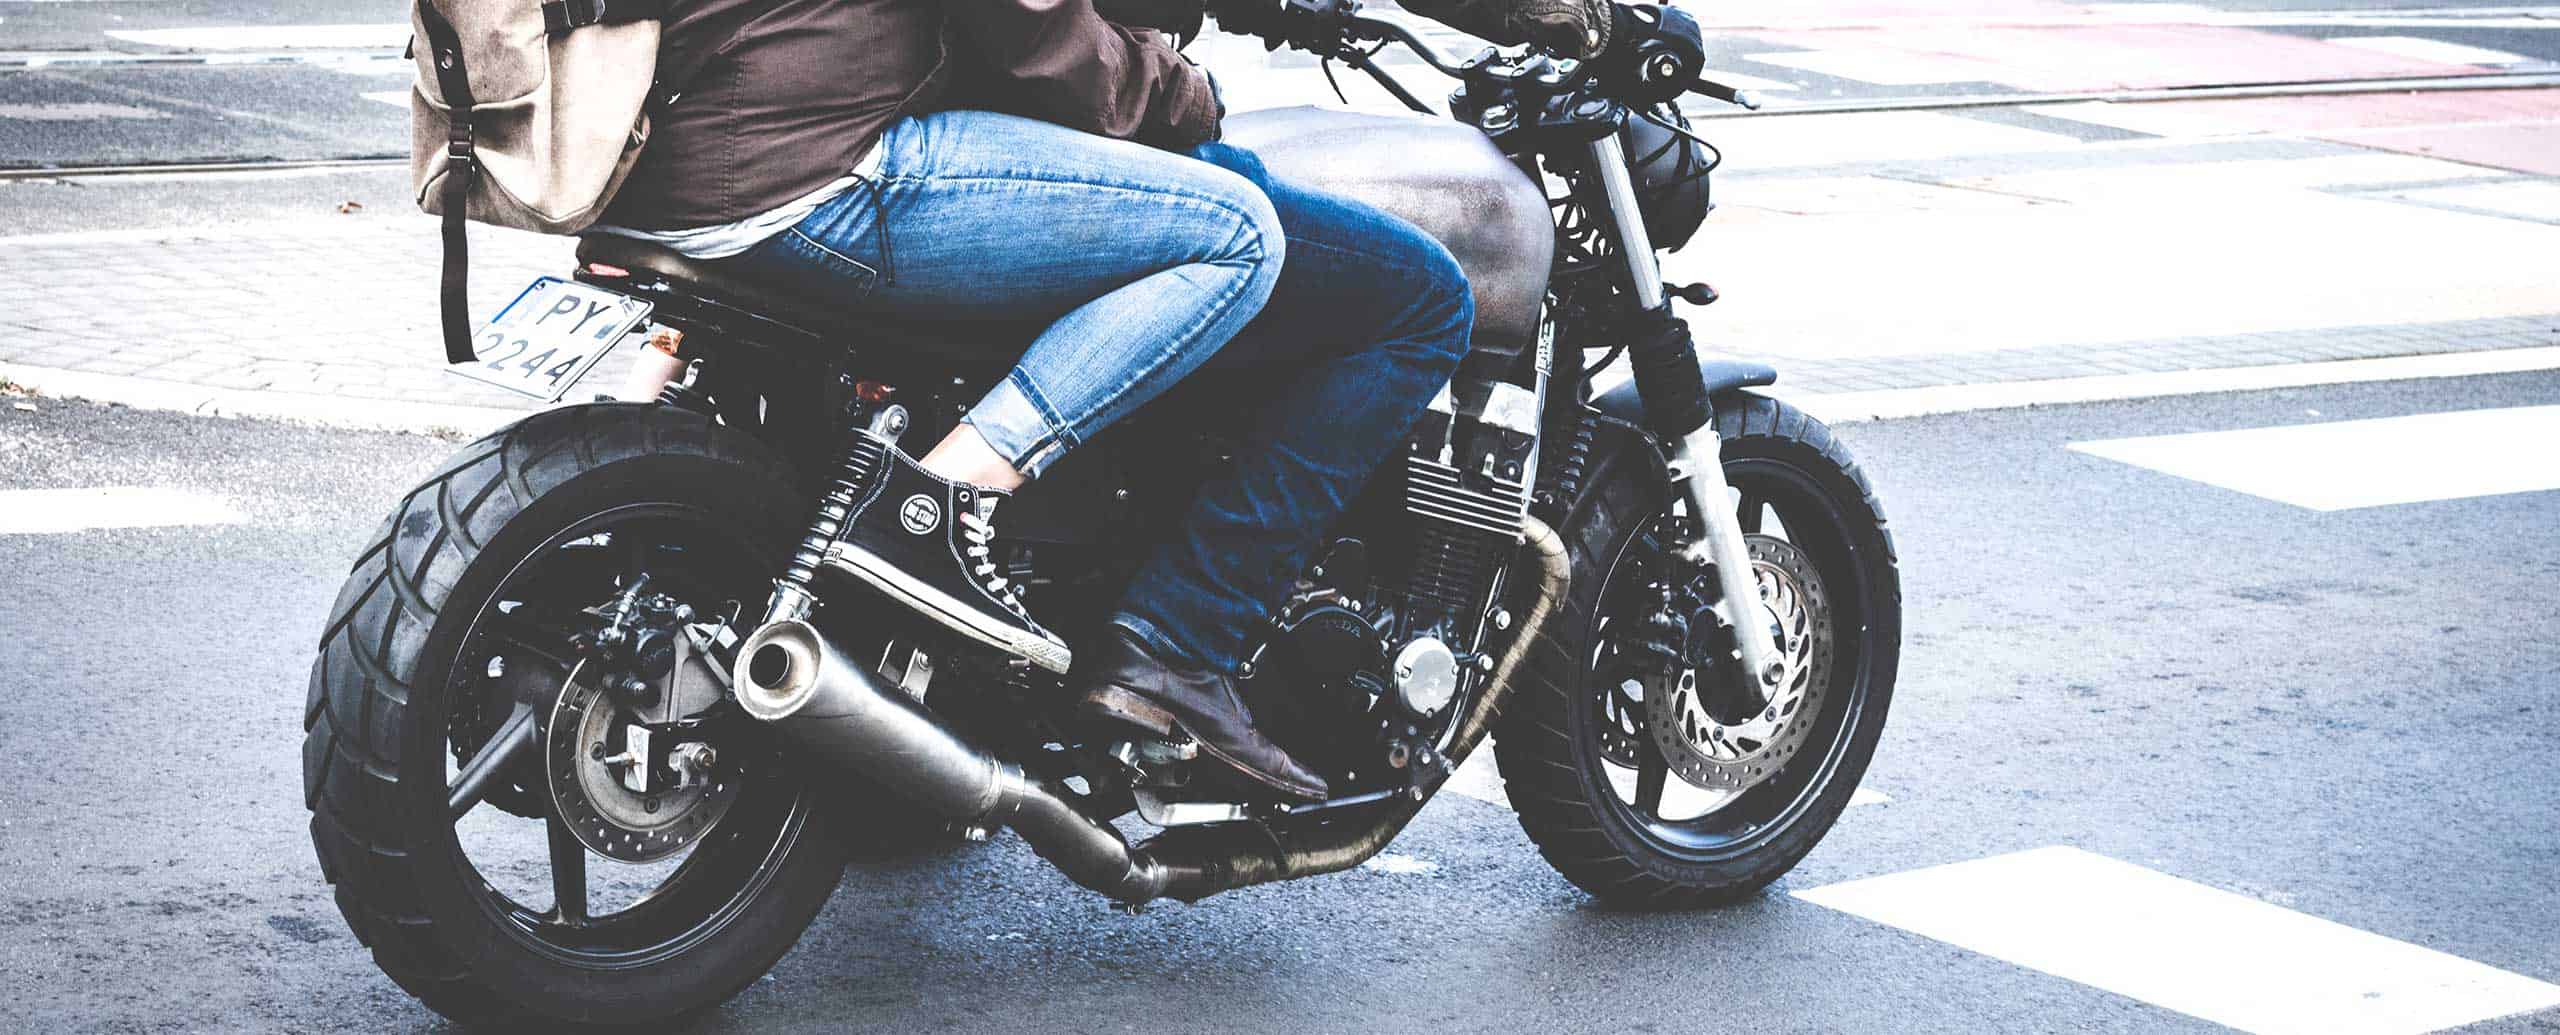 Compare Motorcycle Insurance Quotes